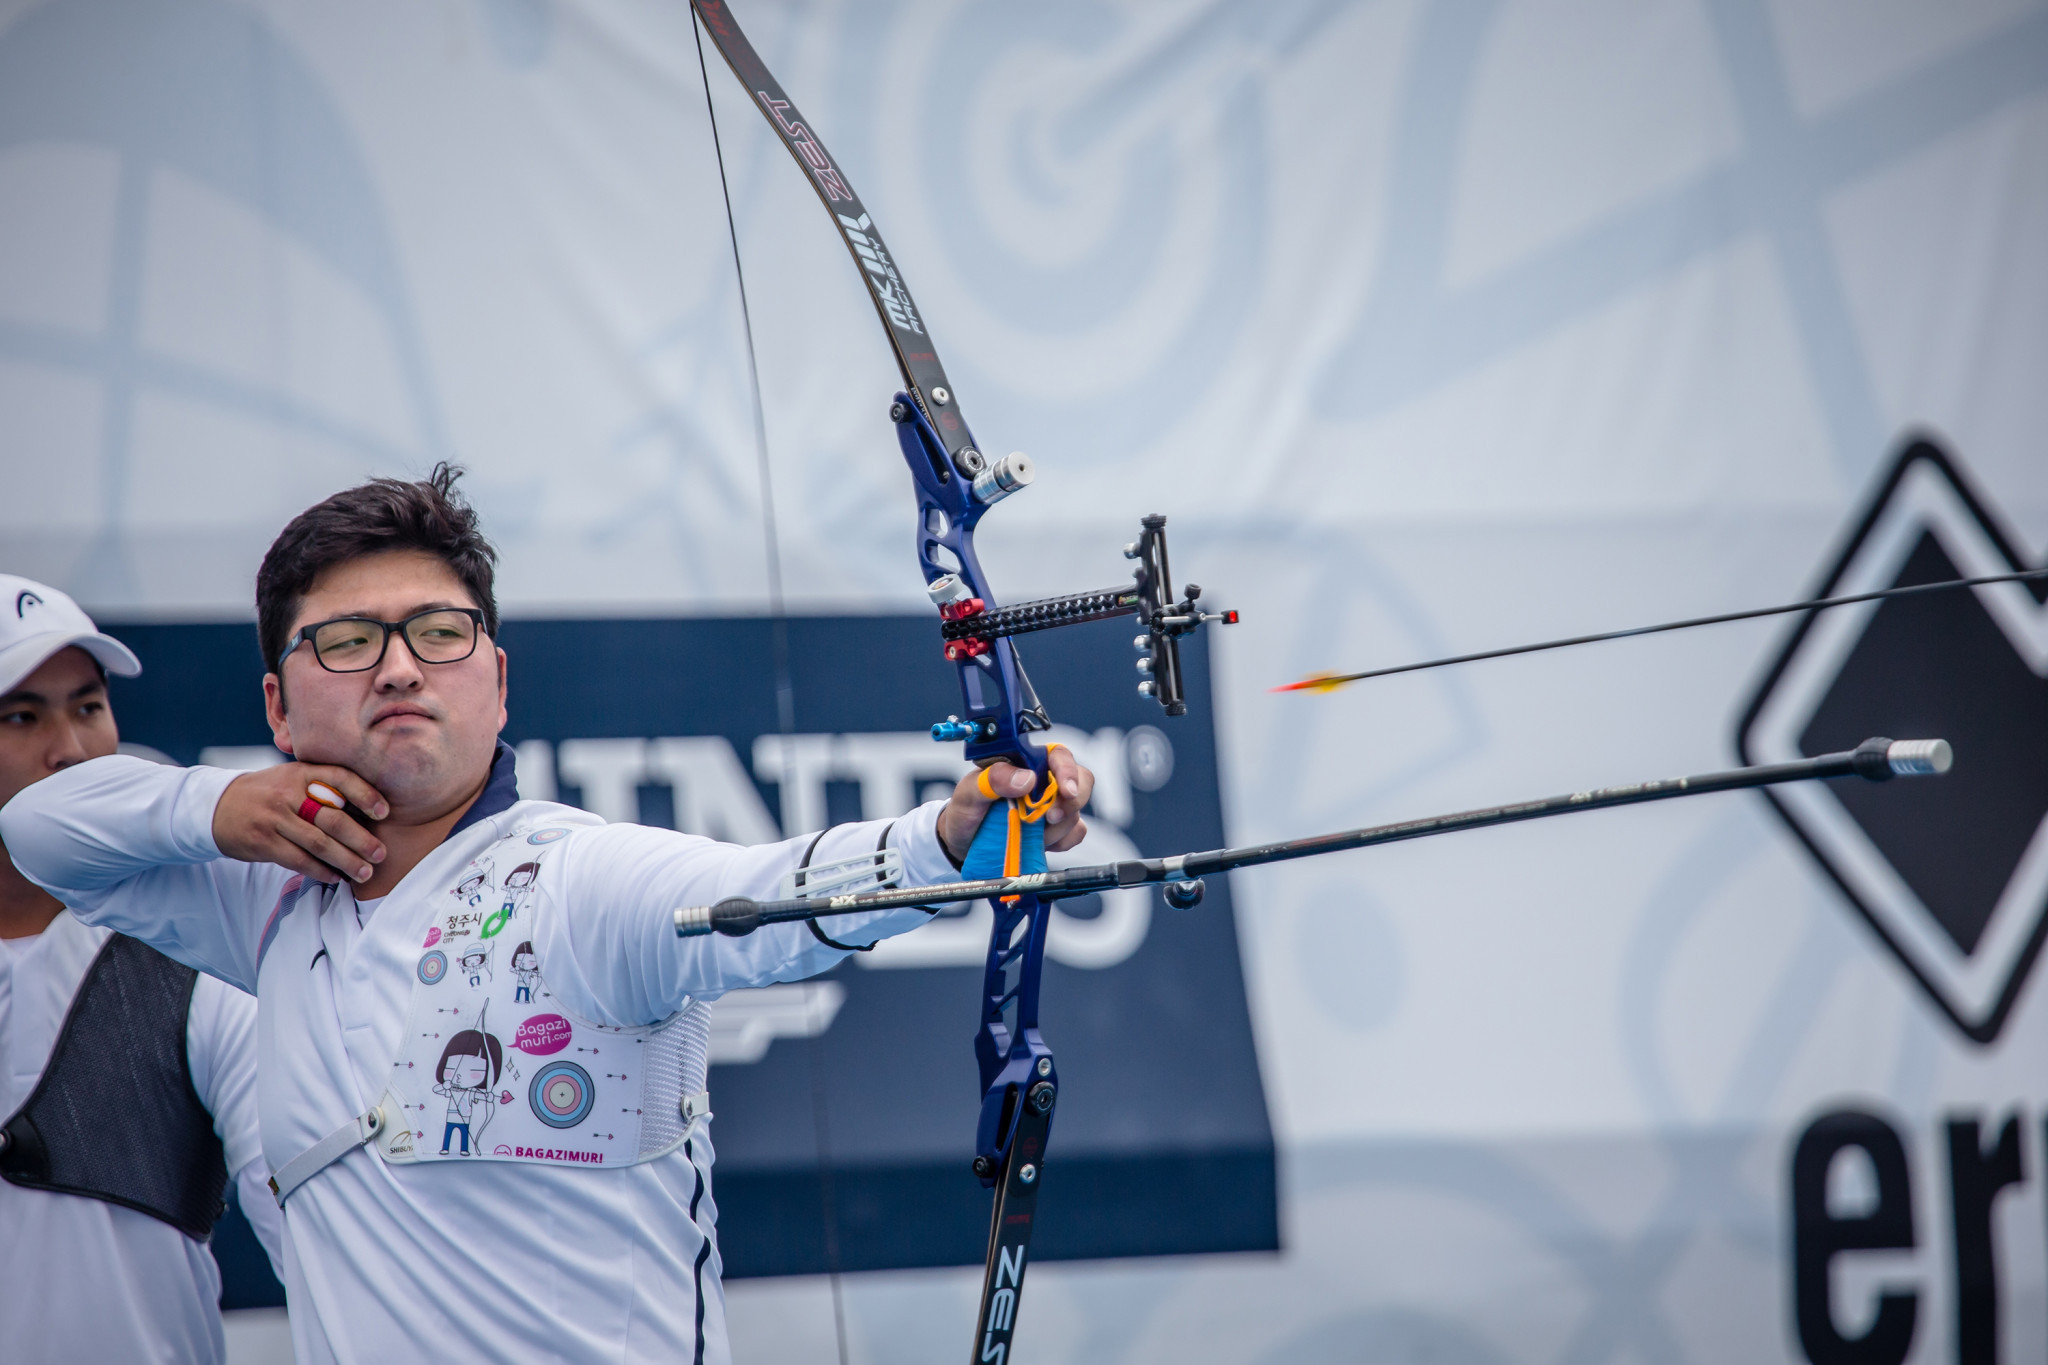 Kim and Lopez to defend titles at Archery World Cup Final